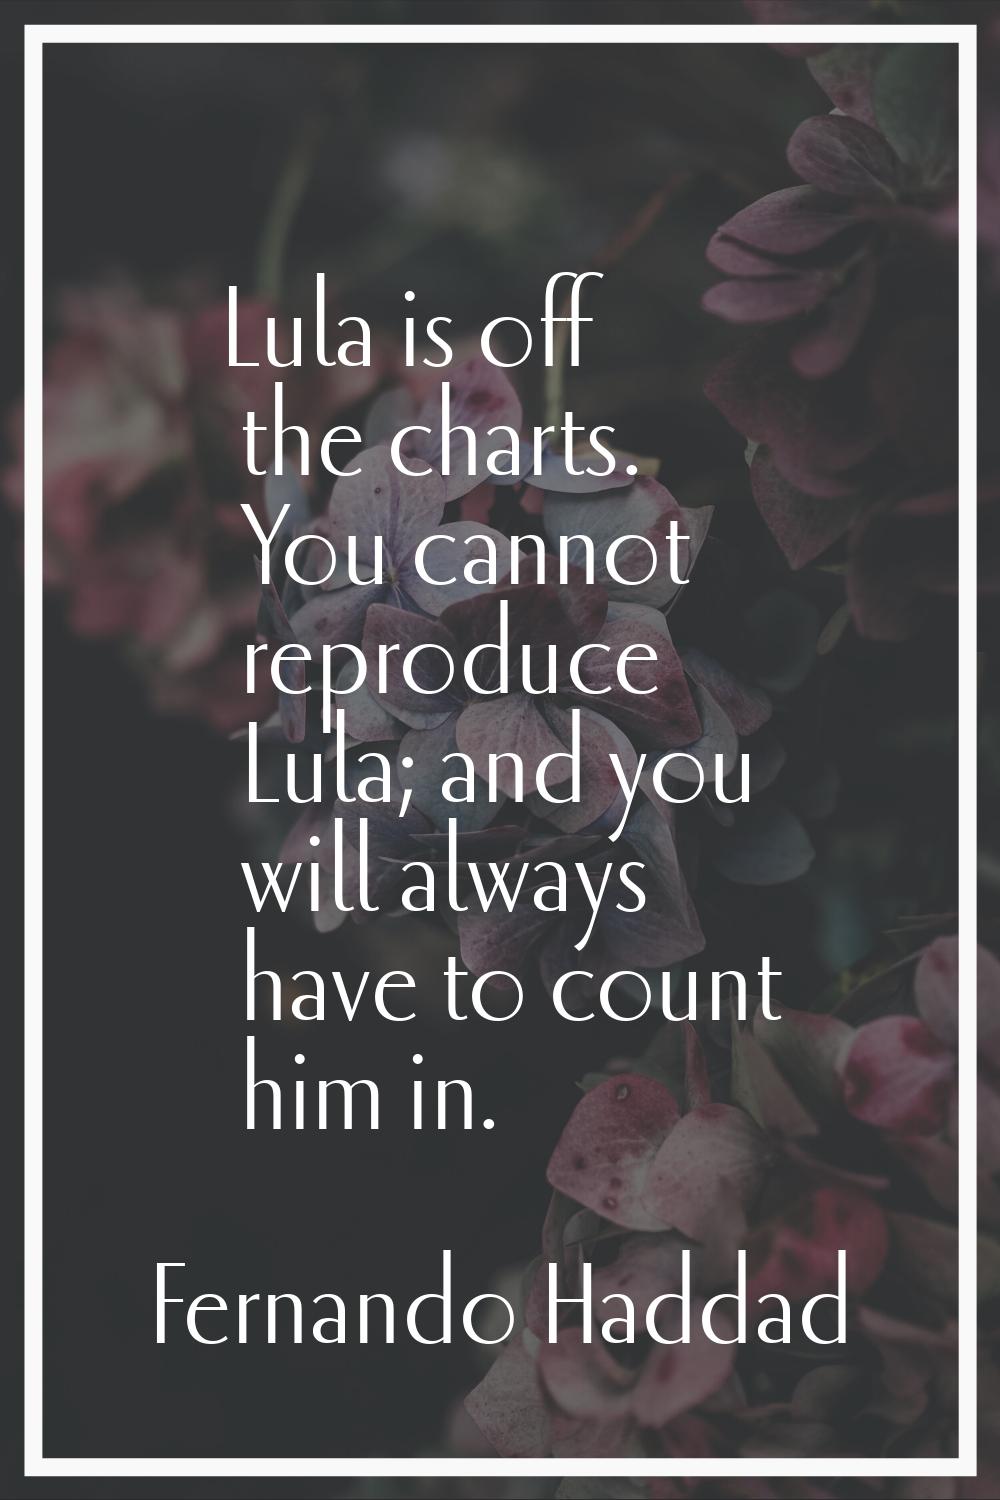 Lula is off the charts. You cannot reproduce Lula; and you will always have to count him in.